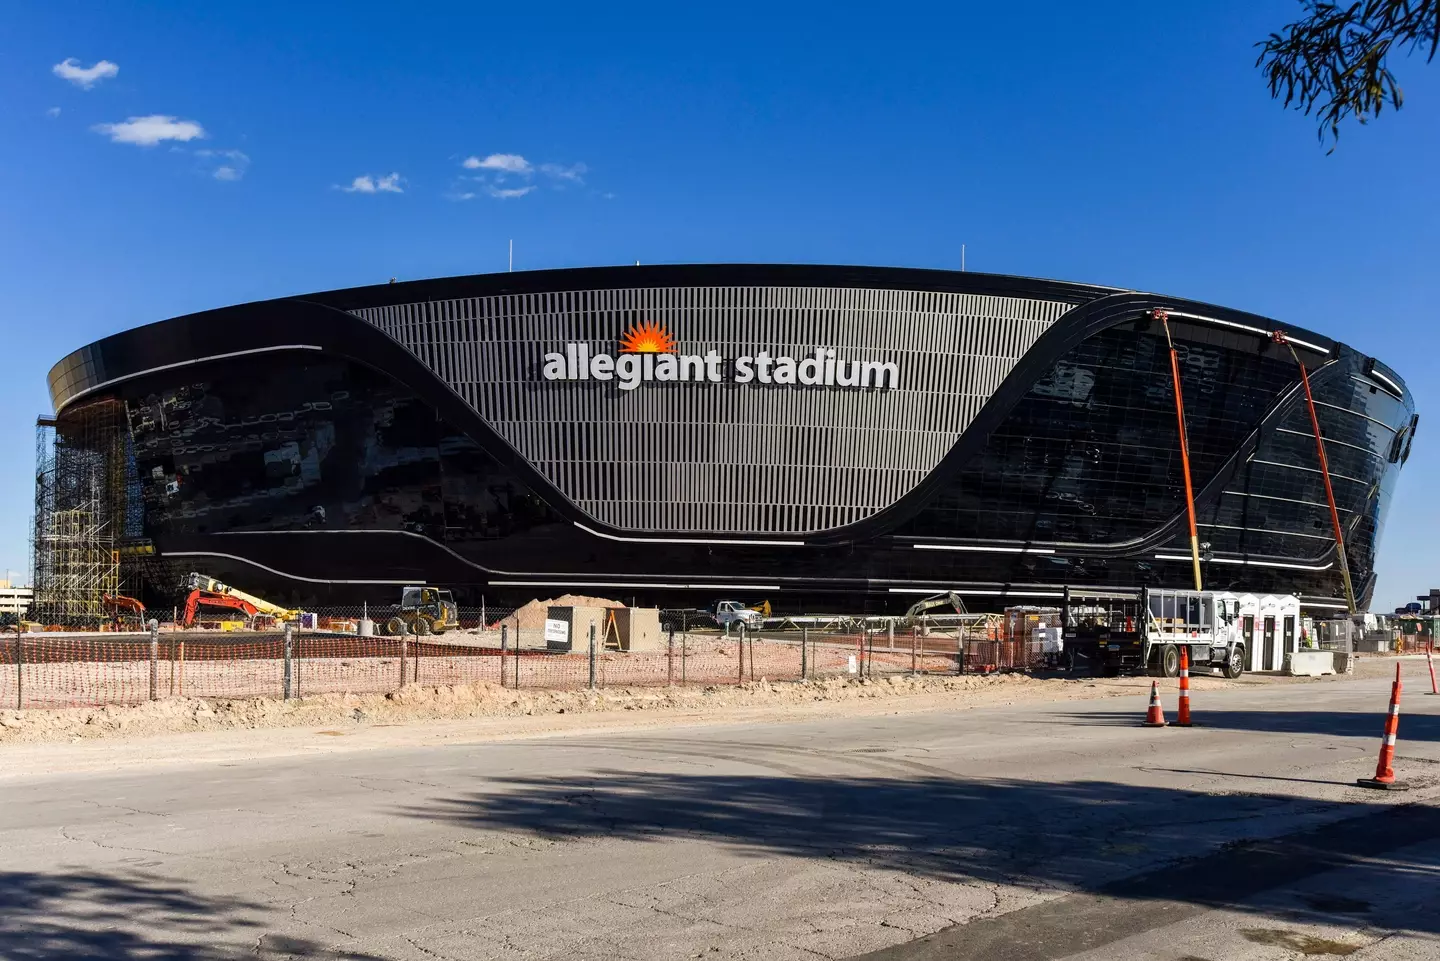 Allegiant Stadium in Las Vegas, where United are hoping to attract new fans. (Image